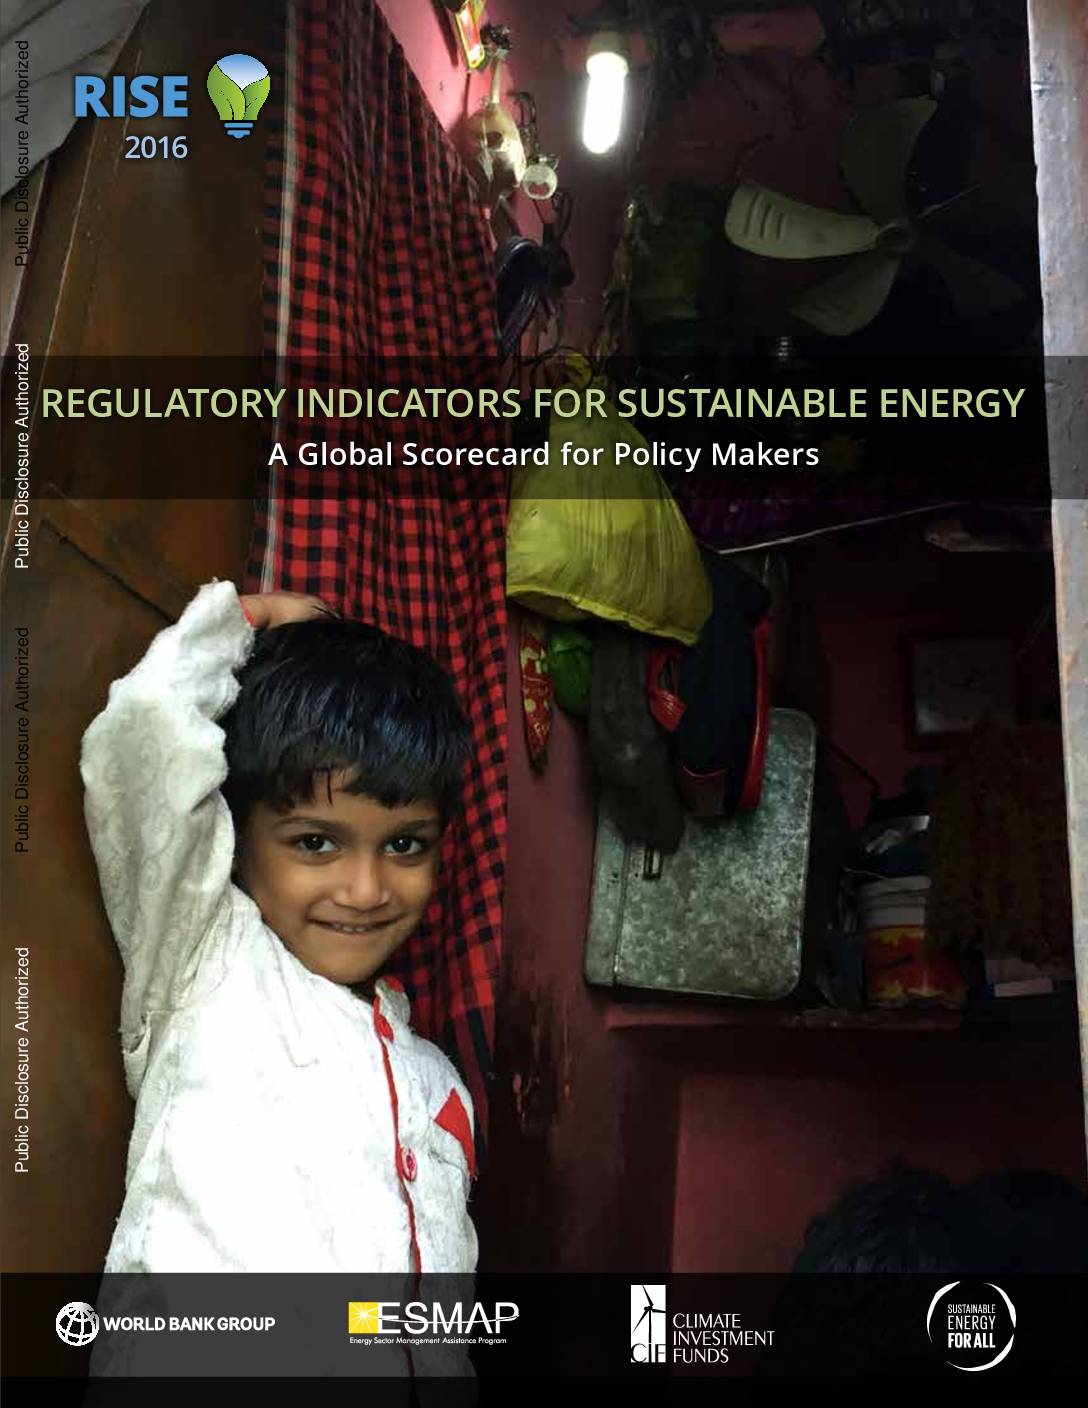 Regulatory indicators for sustainable energy: a global scorecard for policy makers